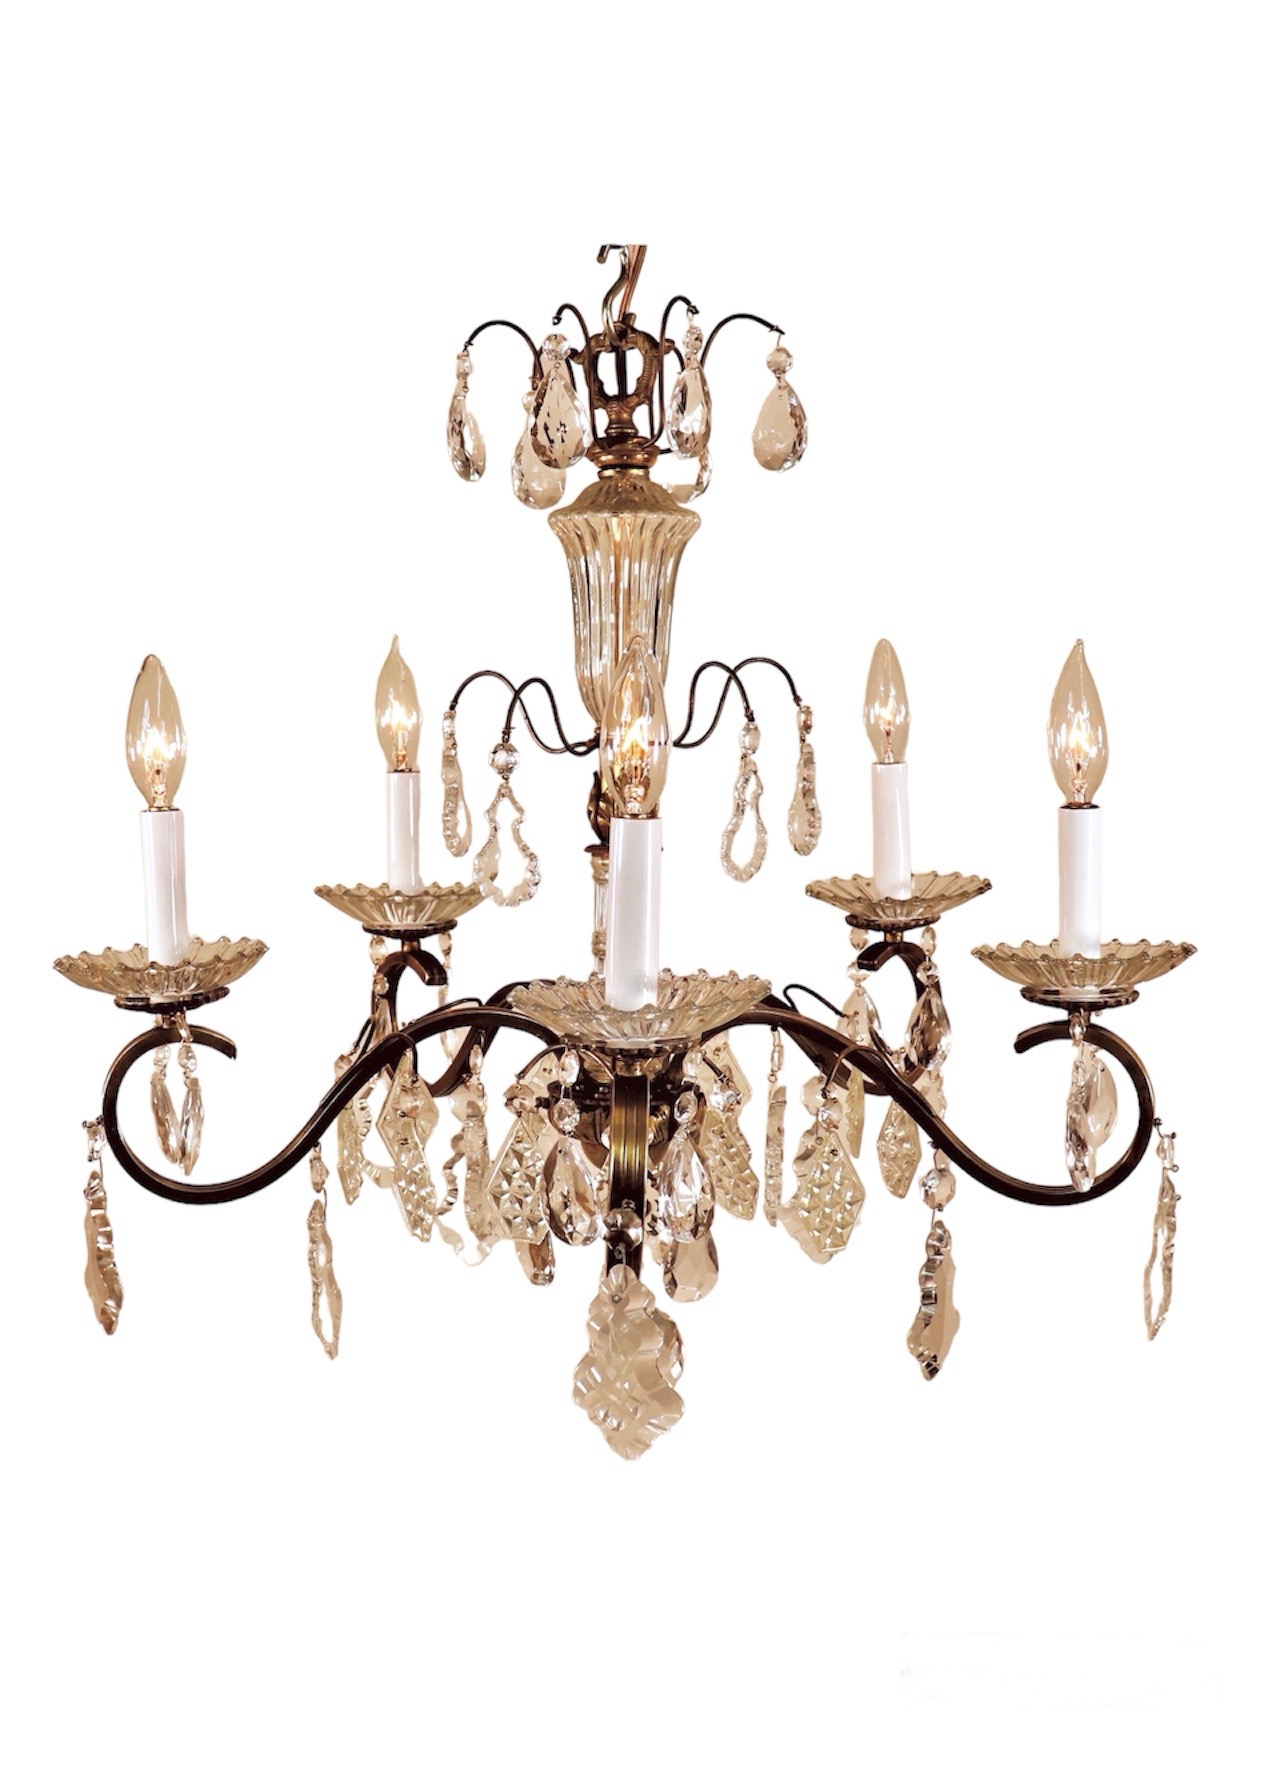 Circa 1930 French Brass and Crystal Chandelier